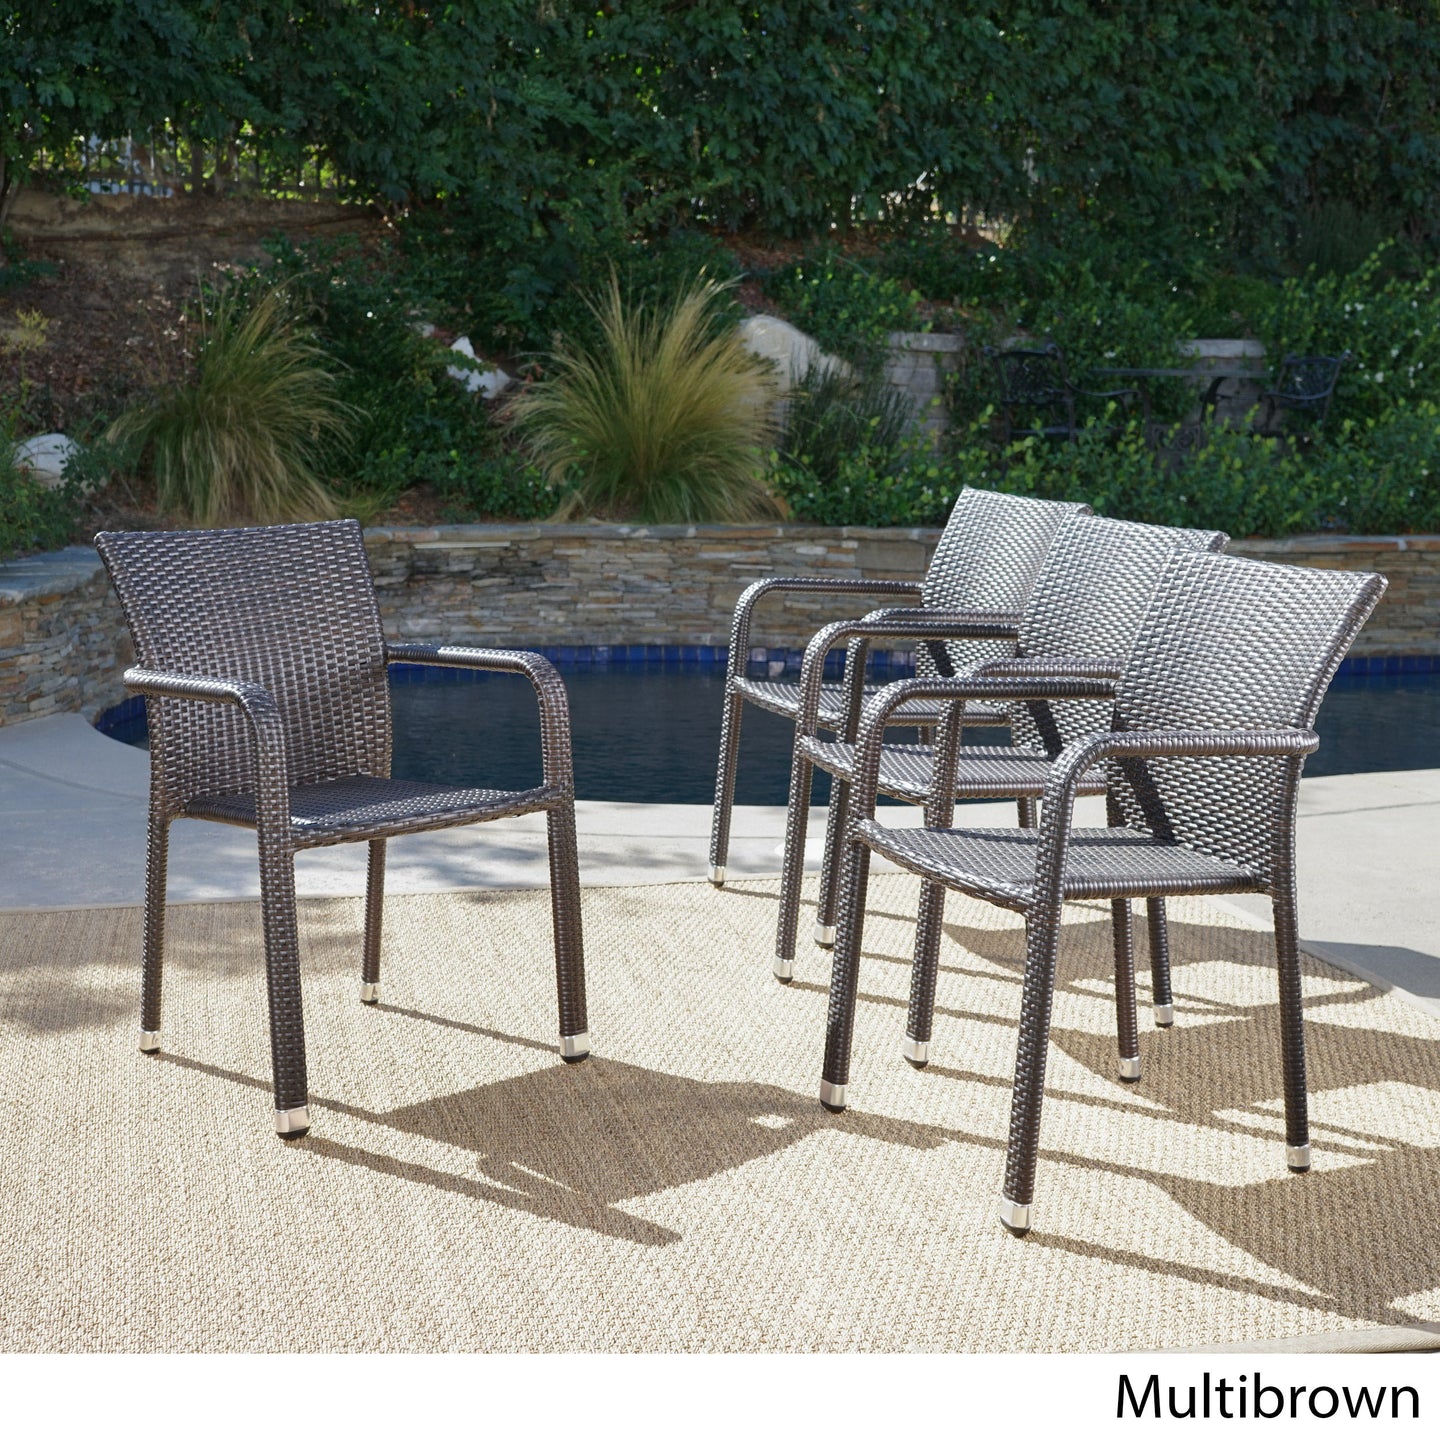 Dorside Outdoor Wicker Armed Stacking Chairs with an Aluminum Frame 4pk  Brown Multi(1555)